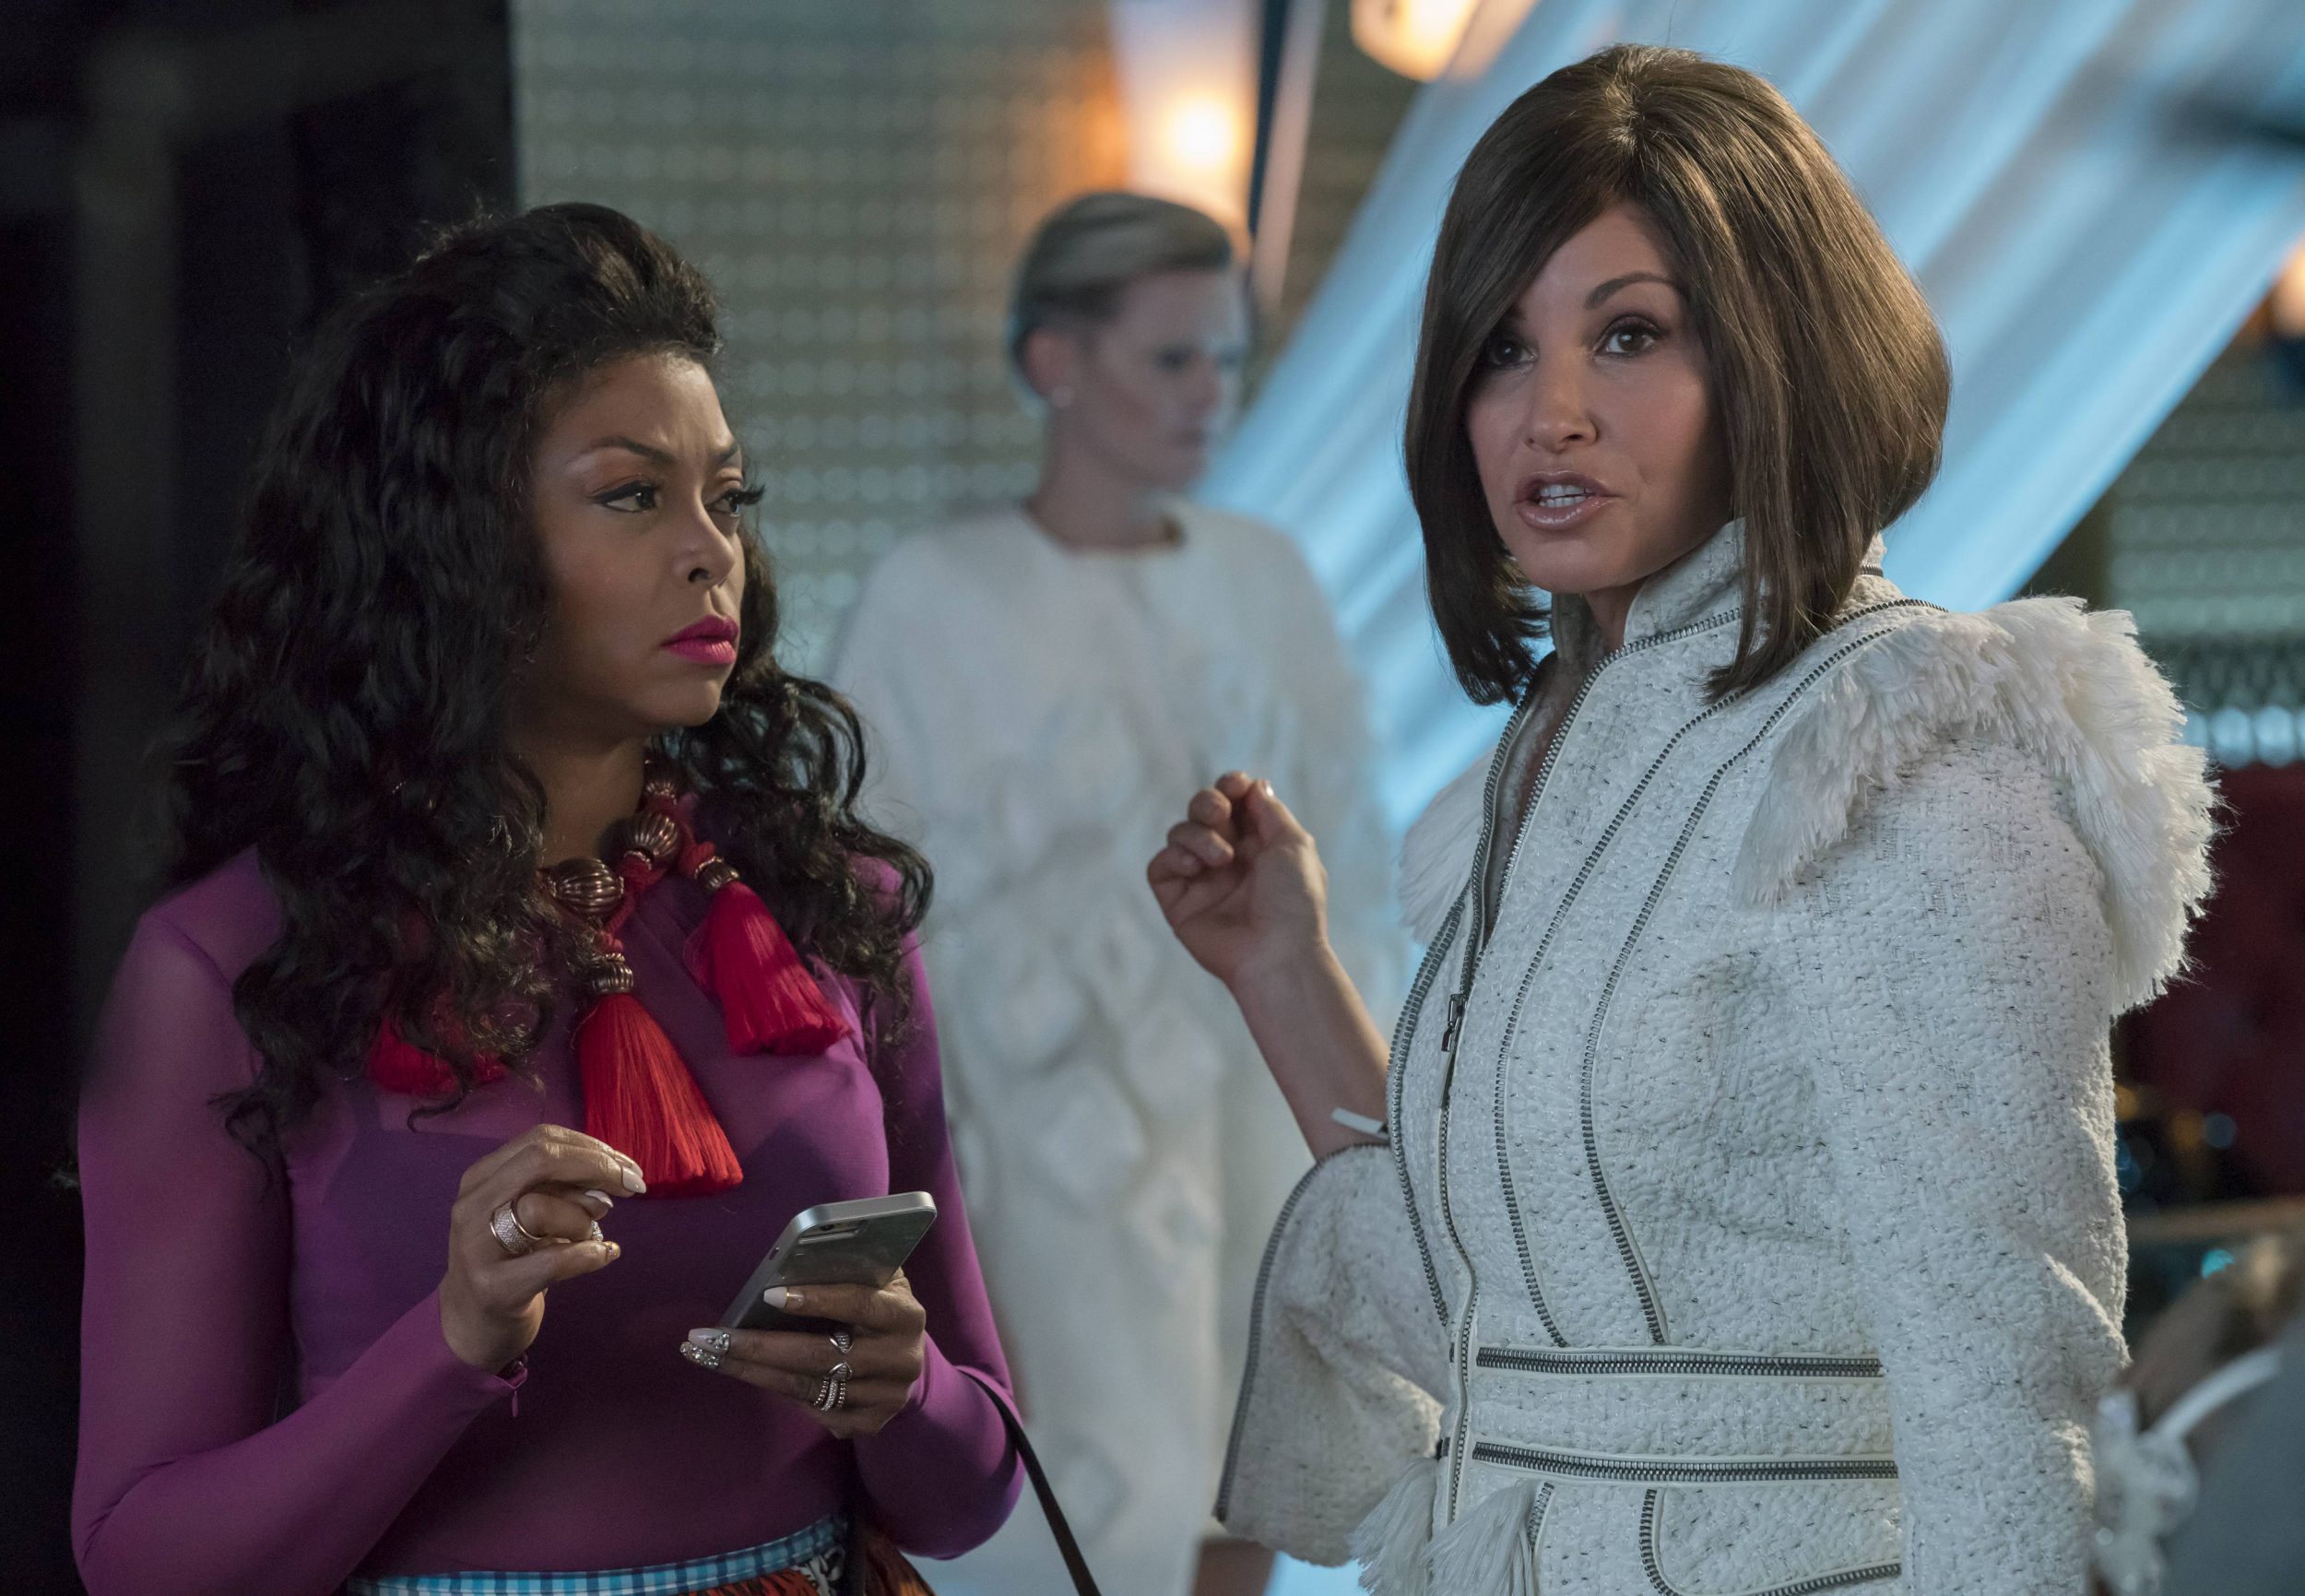 EMPIRE: Pictured L-R: Taraji P. Henson and guest star Gina Gershon in the "The Unkindest Cut" episode of EMPIRE airing Dec. 7 (9:00-10:00 PM ET/PT) on FOX. ©2016 Fox Broadcasting Co. CR: Chuck Hodes/FOX